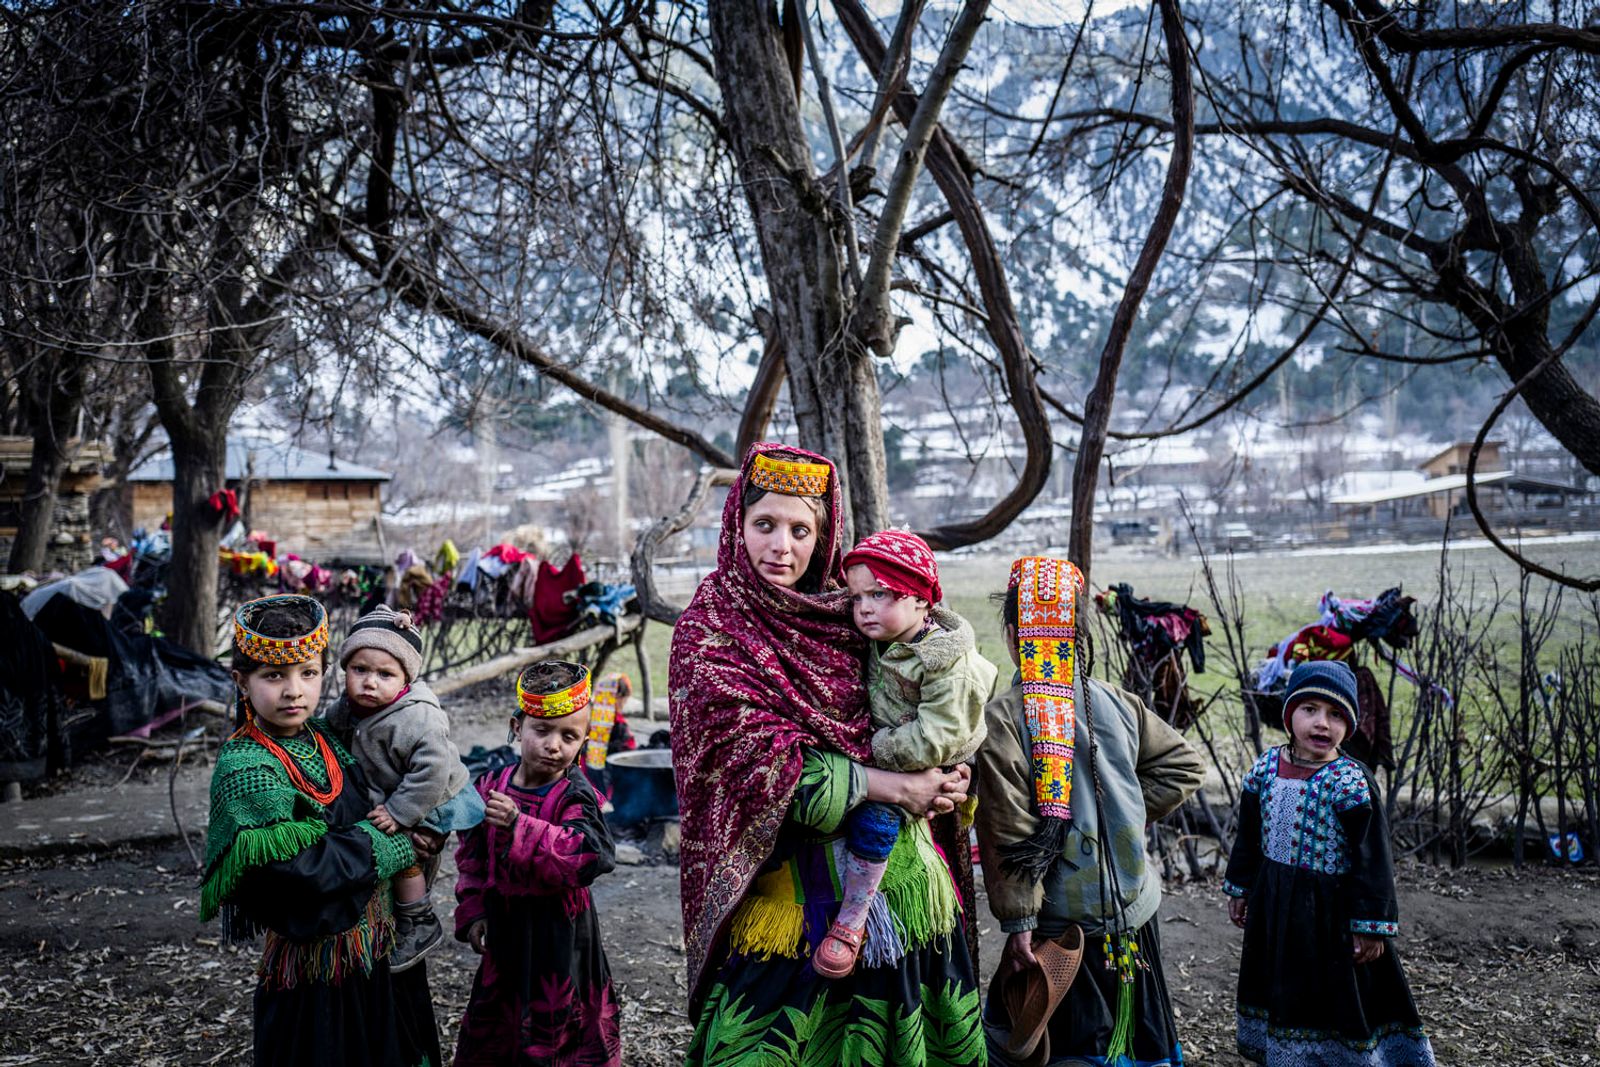 © Sarah Caron - Image from the Last of the Kalash photography project